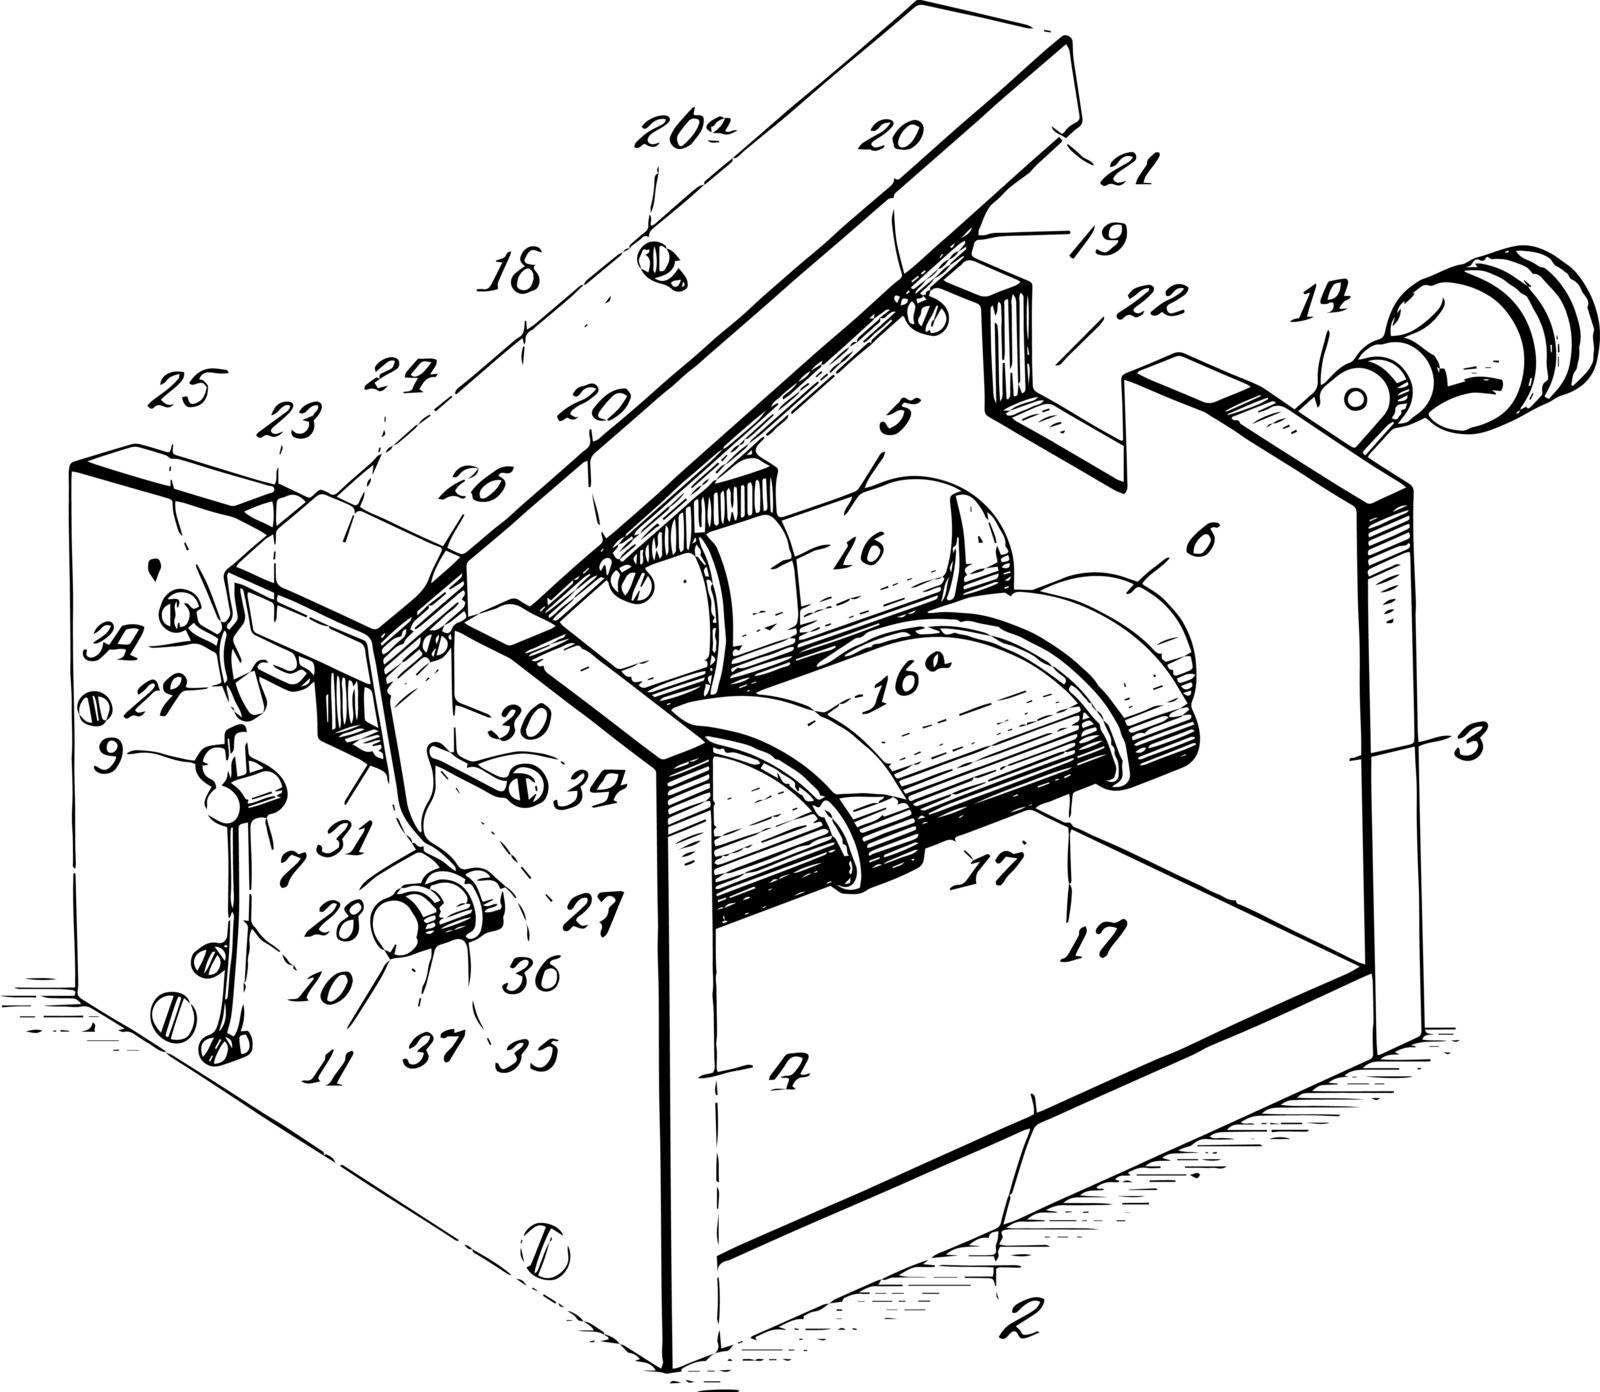 This illustration represents Razor Stropper which is used to sharpen vintage line drawing or engraving illustration.